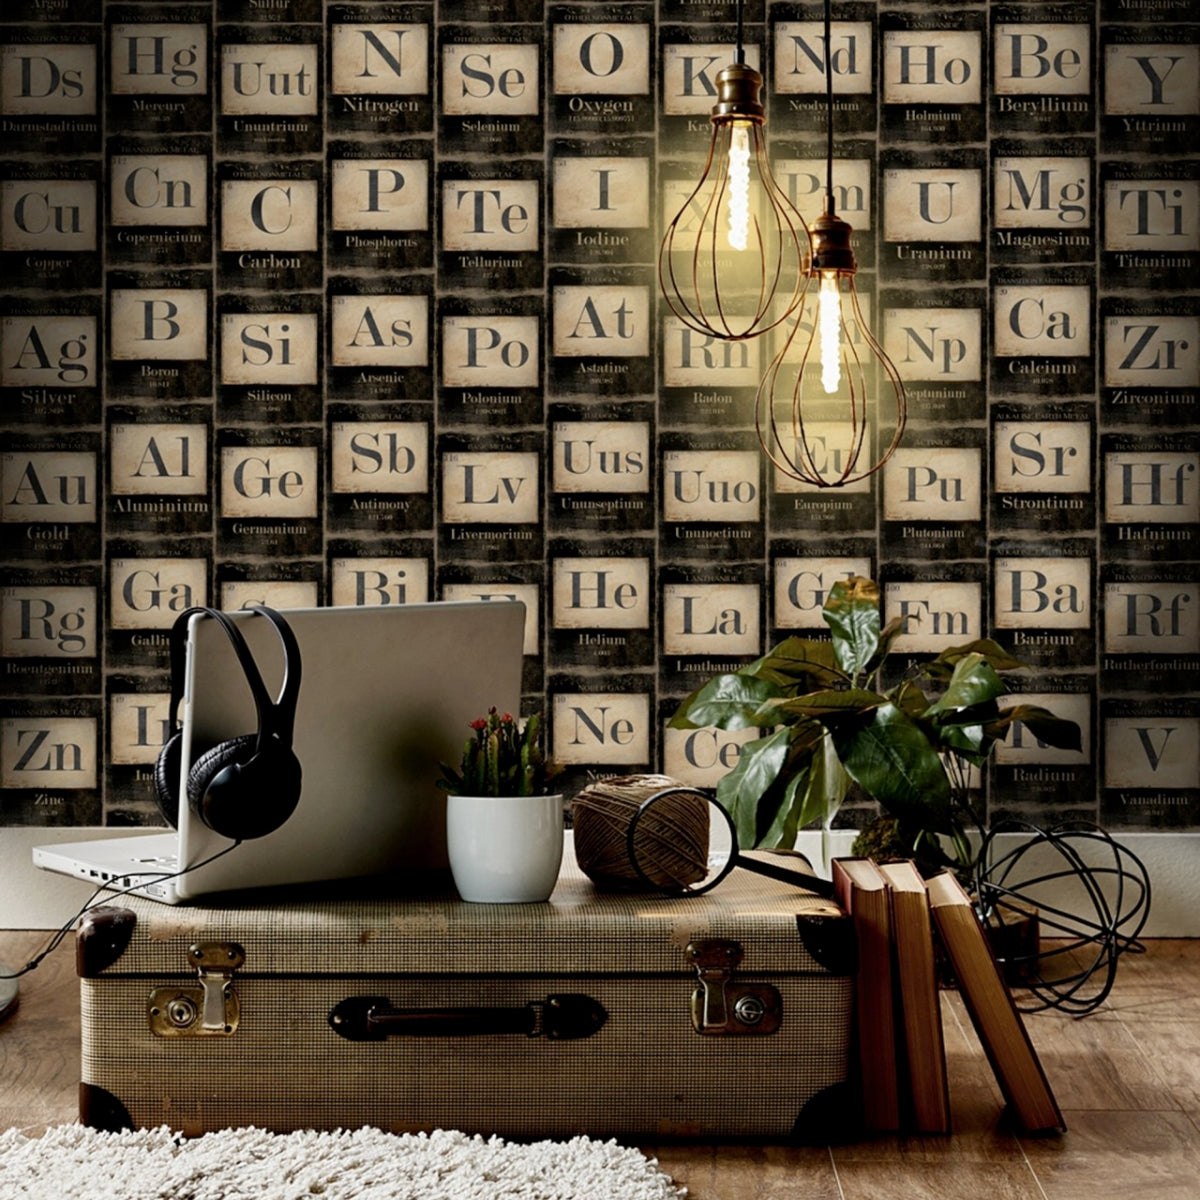 Mind The Gap - Periodic Table of Elements Wallpaper